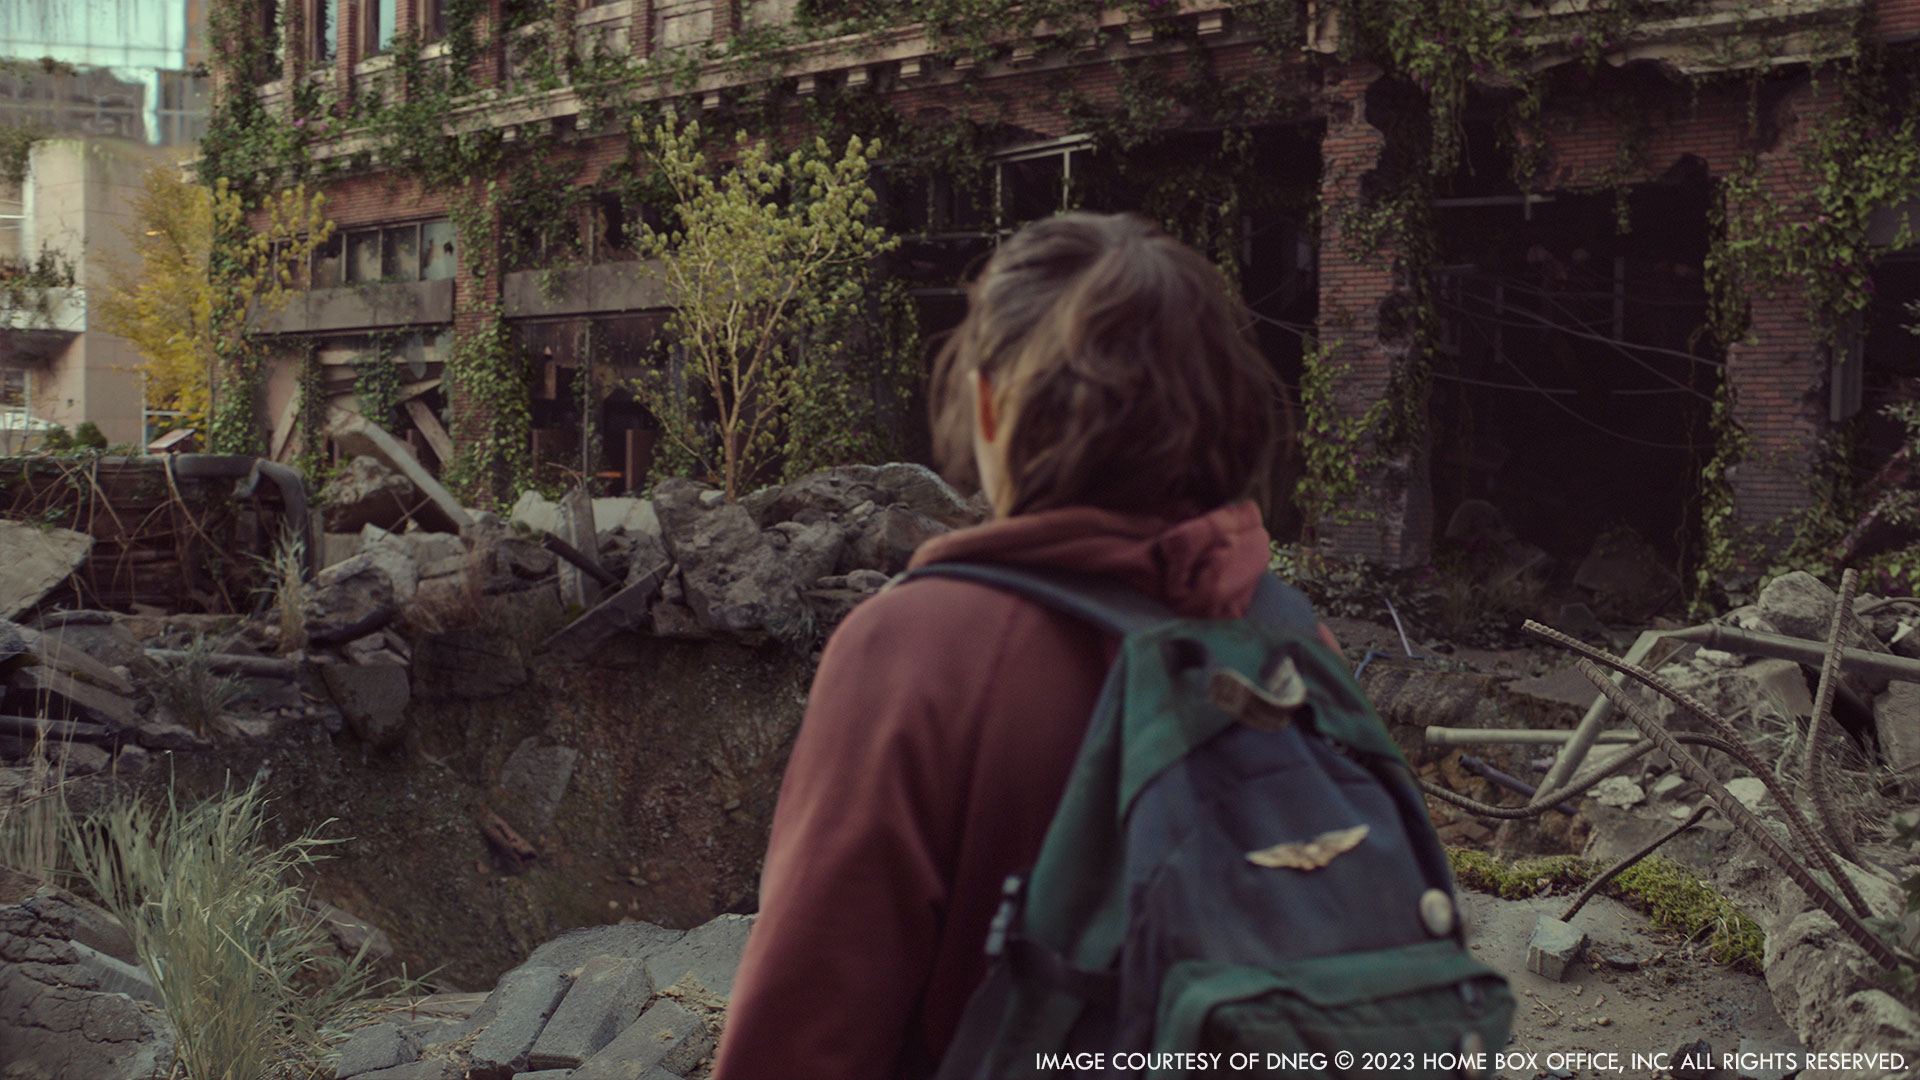 The Last of Us: Main Title by Elastic - The Art of VFX